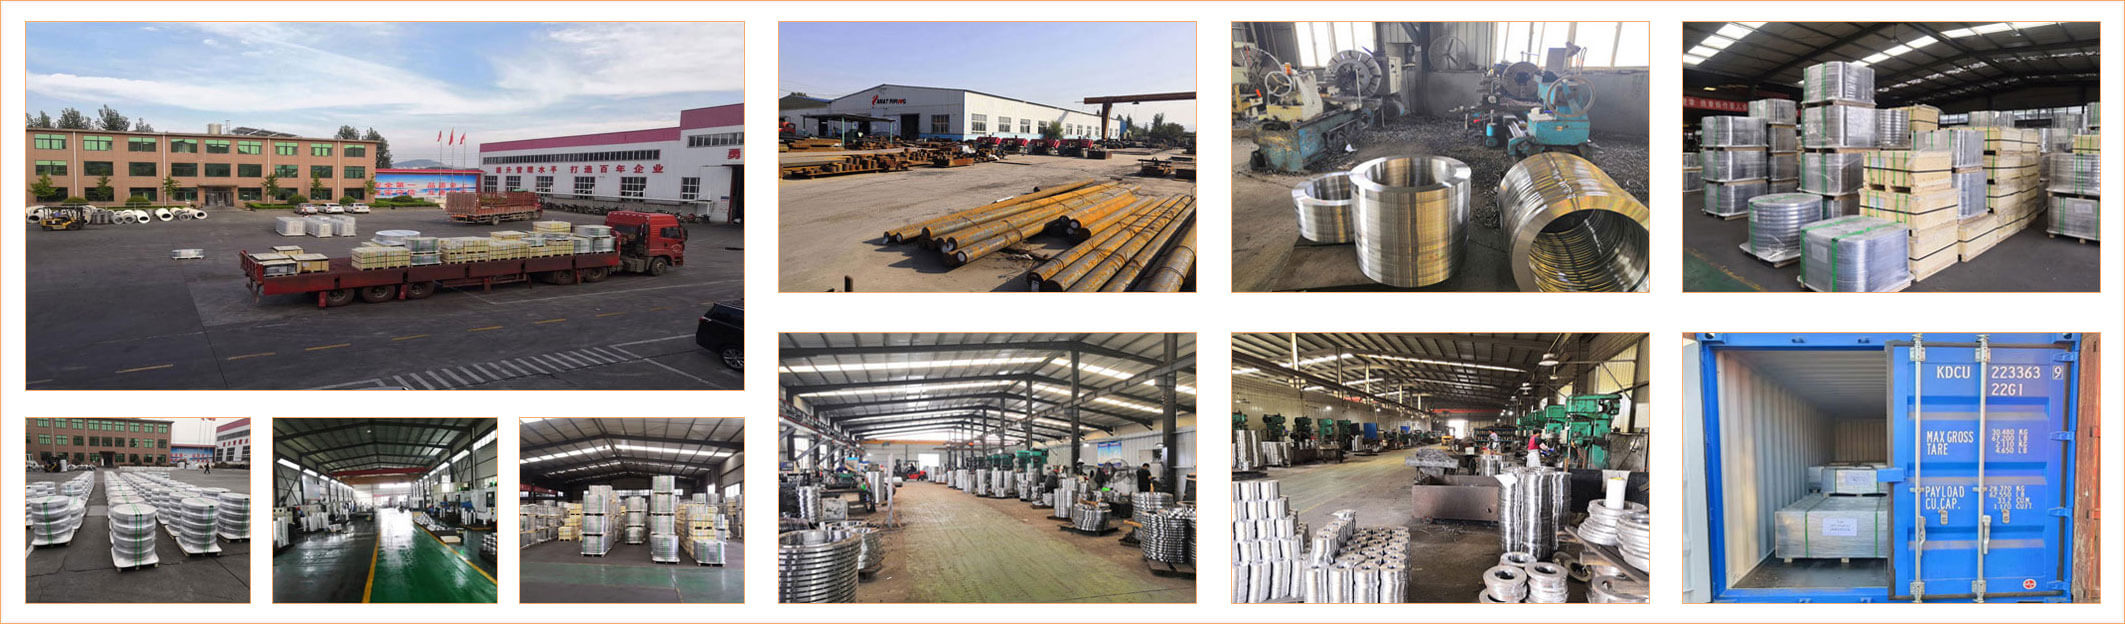 LAMAT PIPING is China's reputed and leading manufacturer and supplier in pipe fittings,flanges & valves,who has been supplying oversea markets for over 30 years.